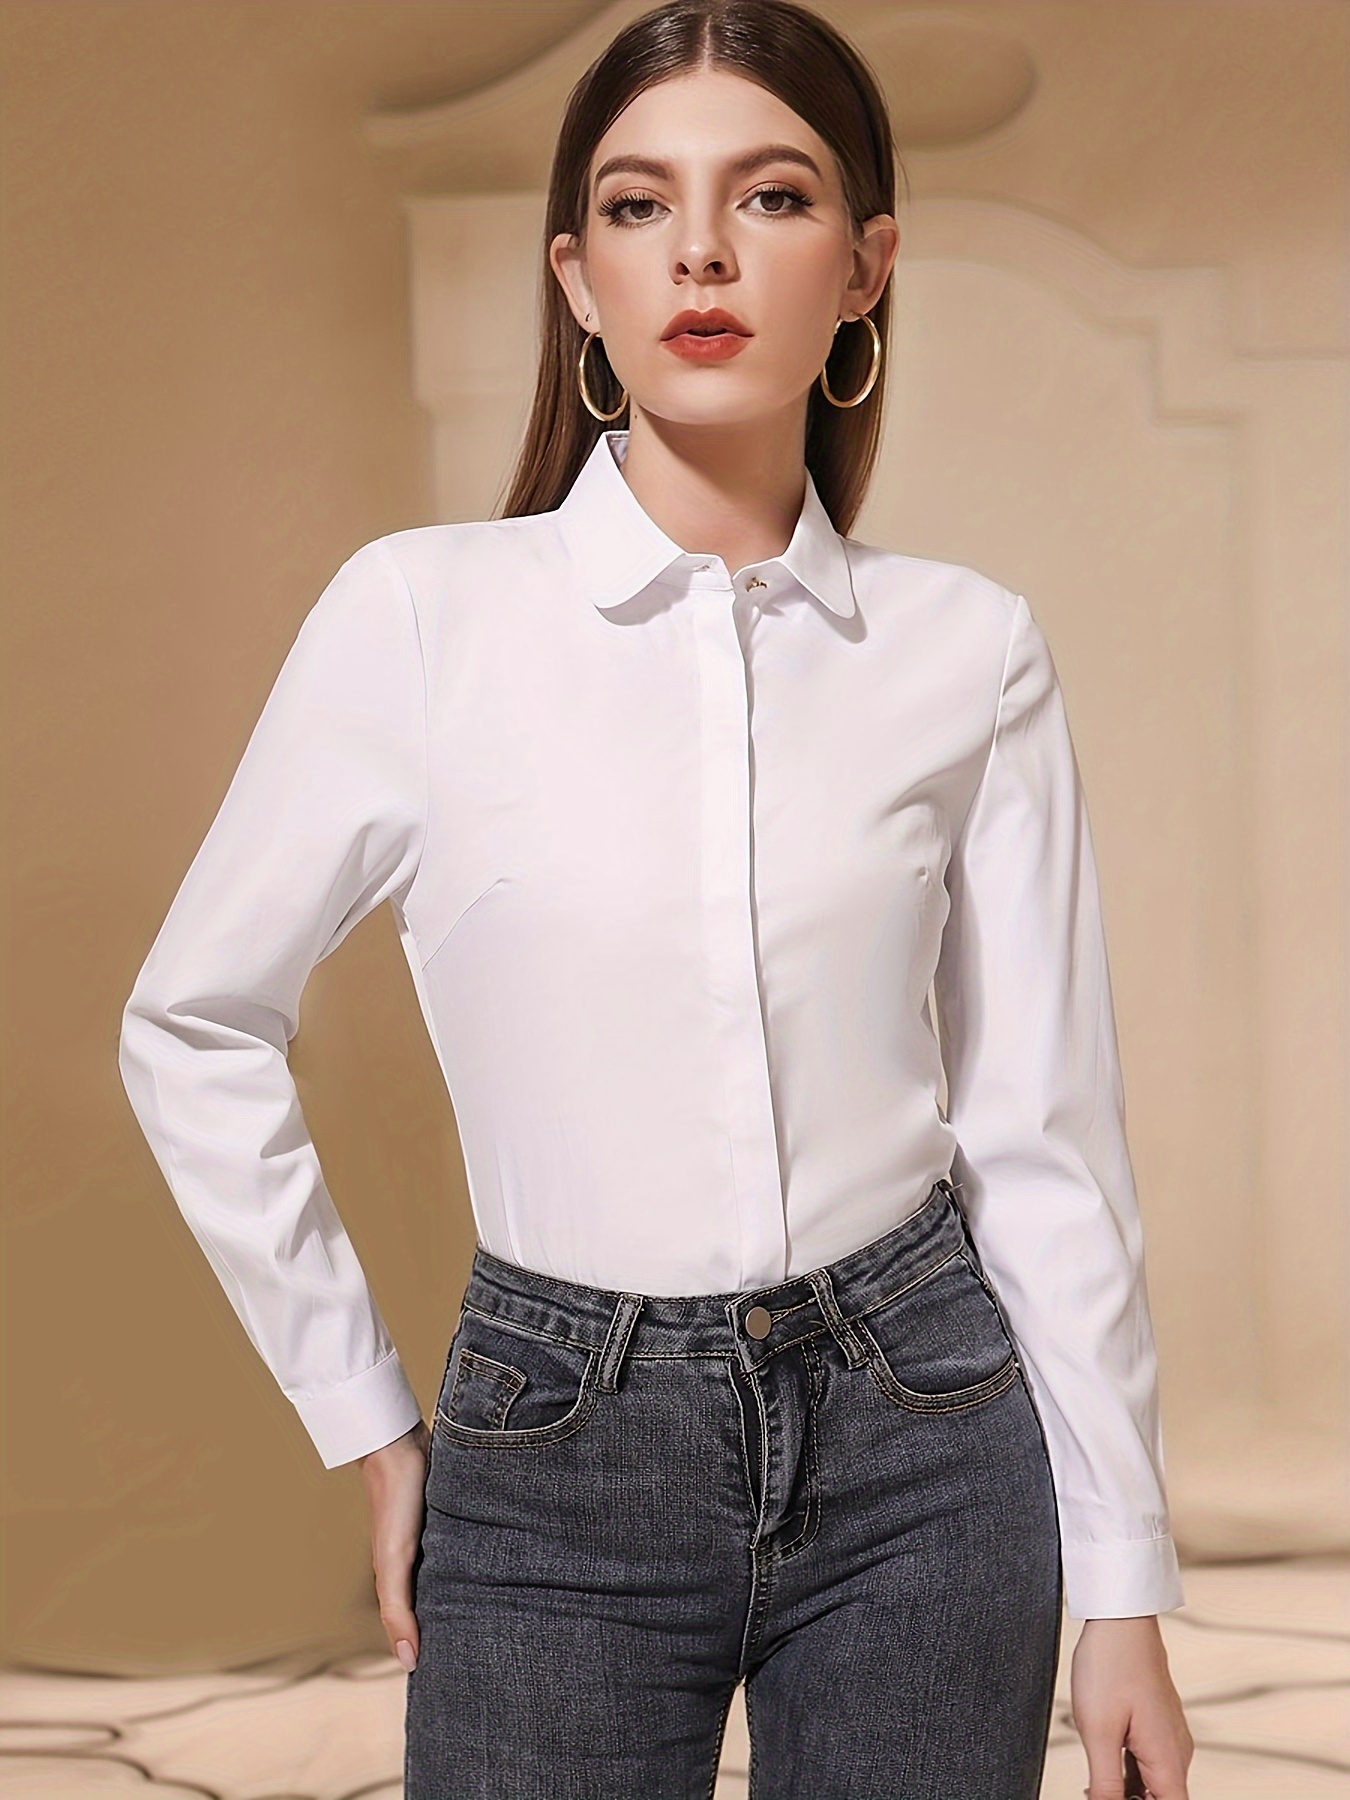 New Style White Collar Shirt Women Office Uniform Casual Tops For